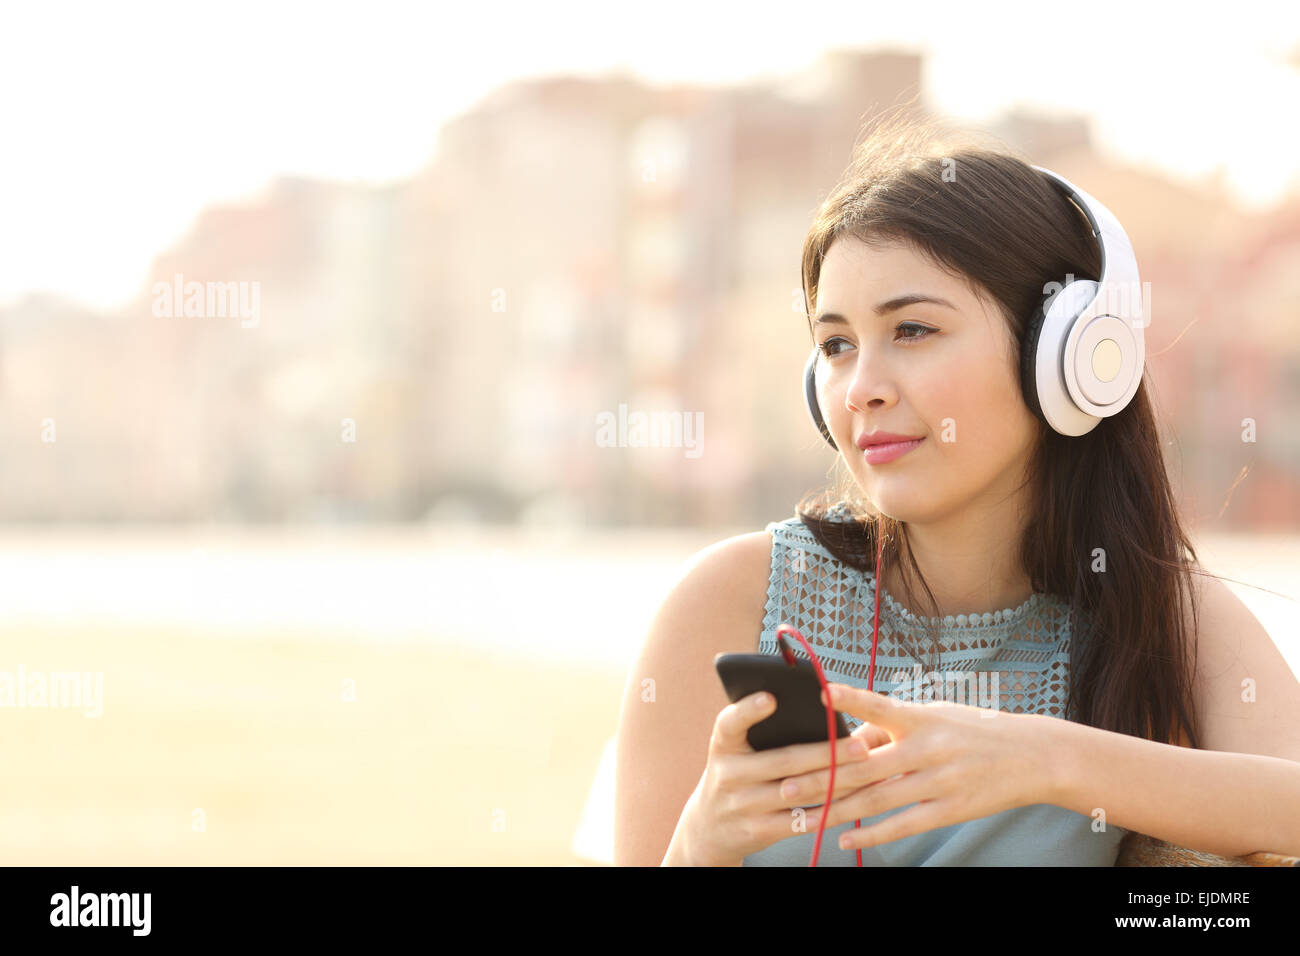 Candid girl thoughtful and listening to the music with a smart phone and looking away Stock Photo